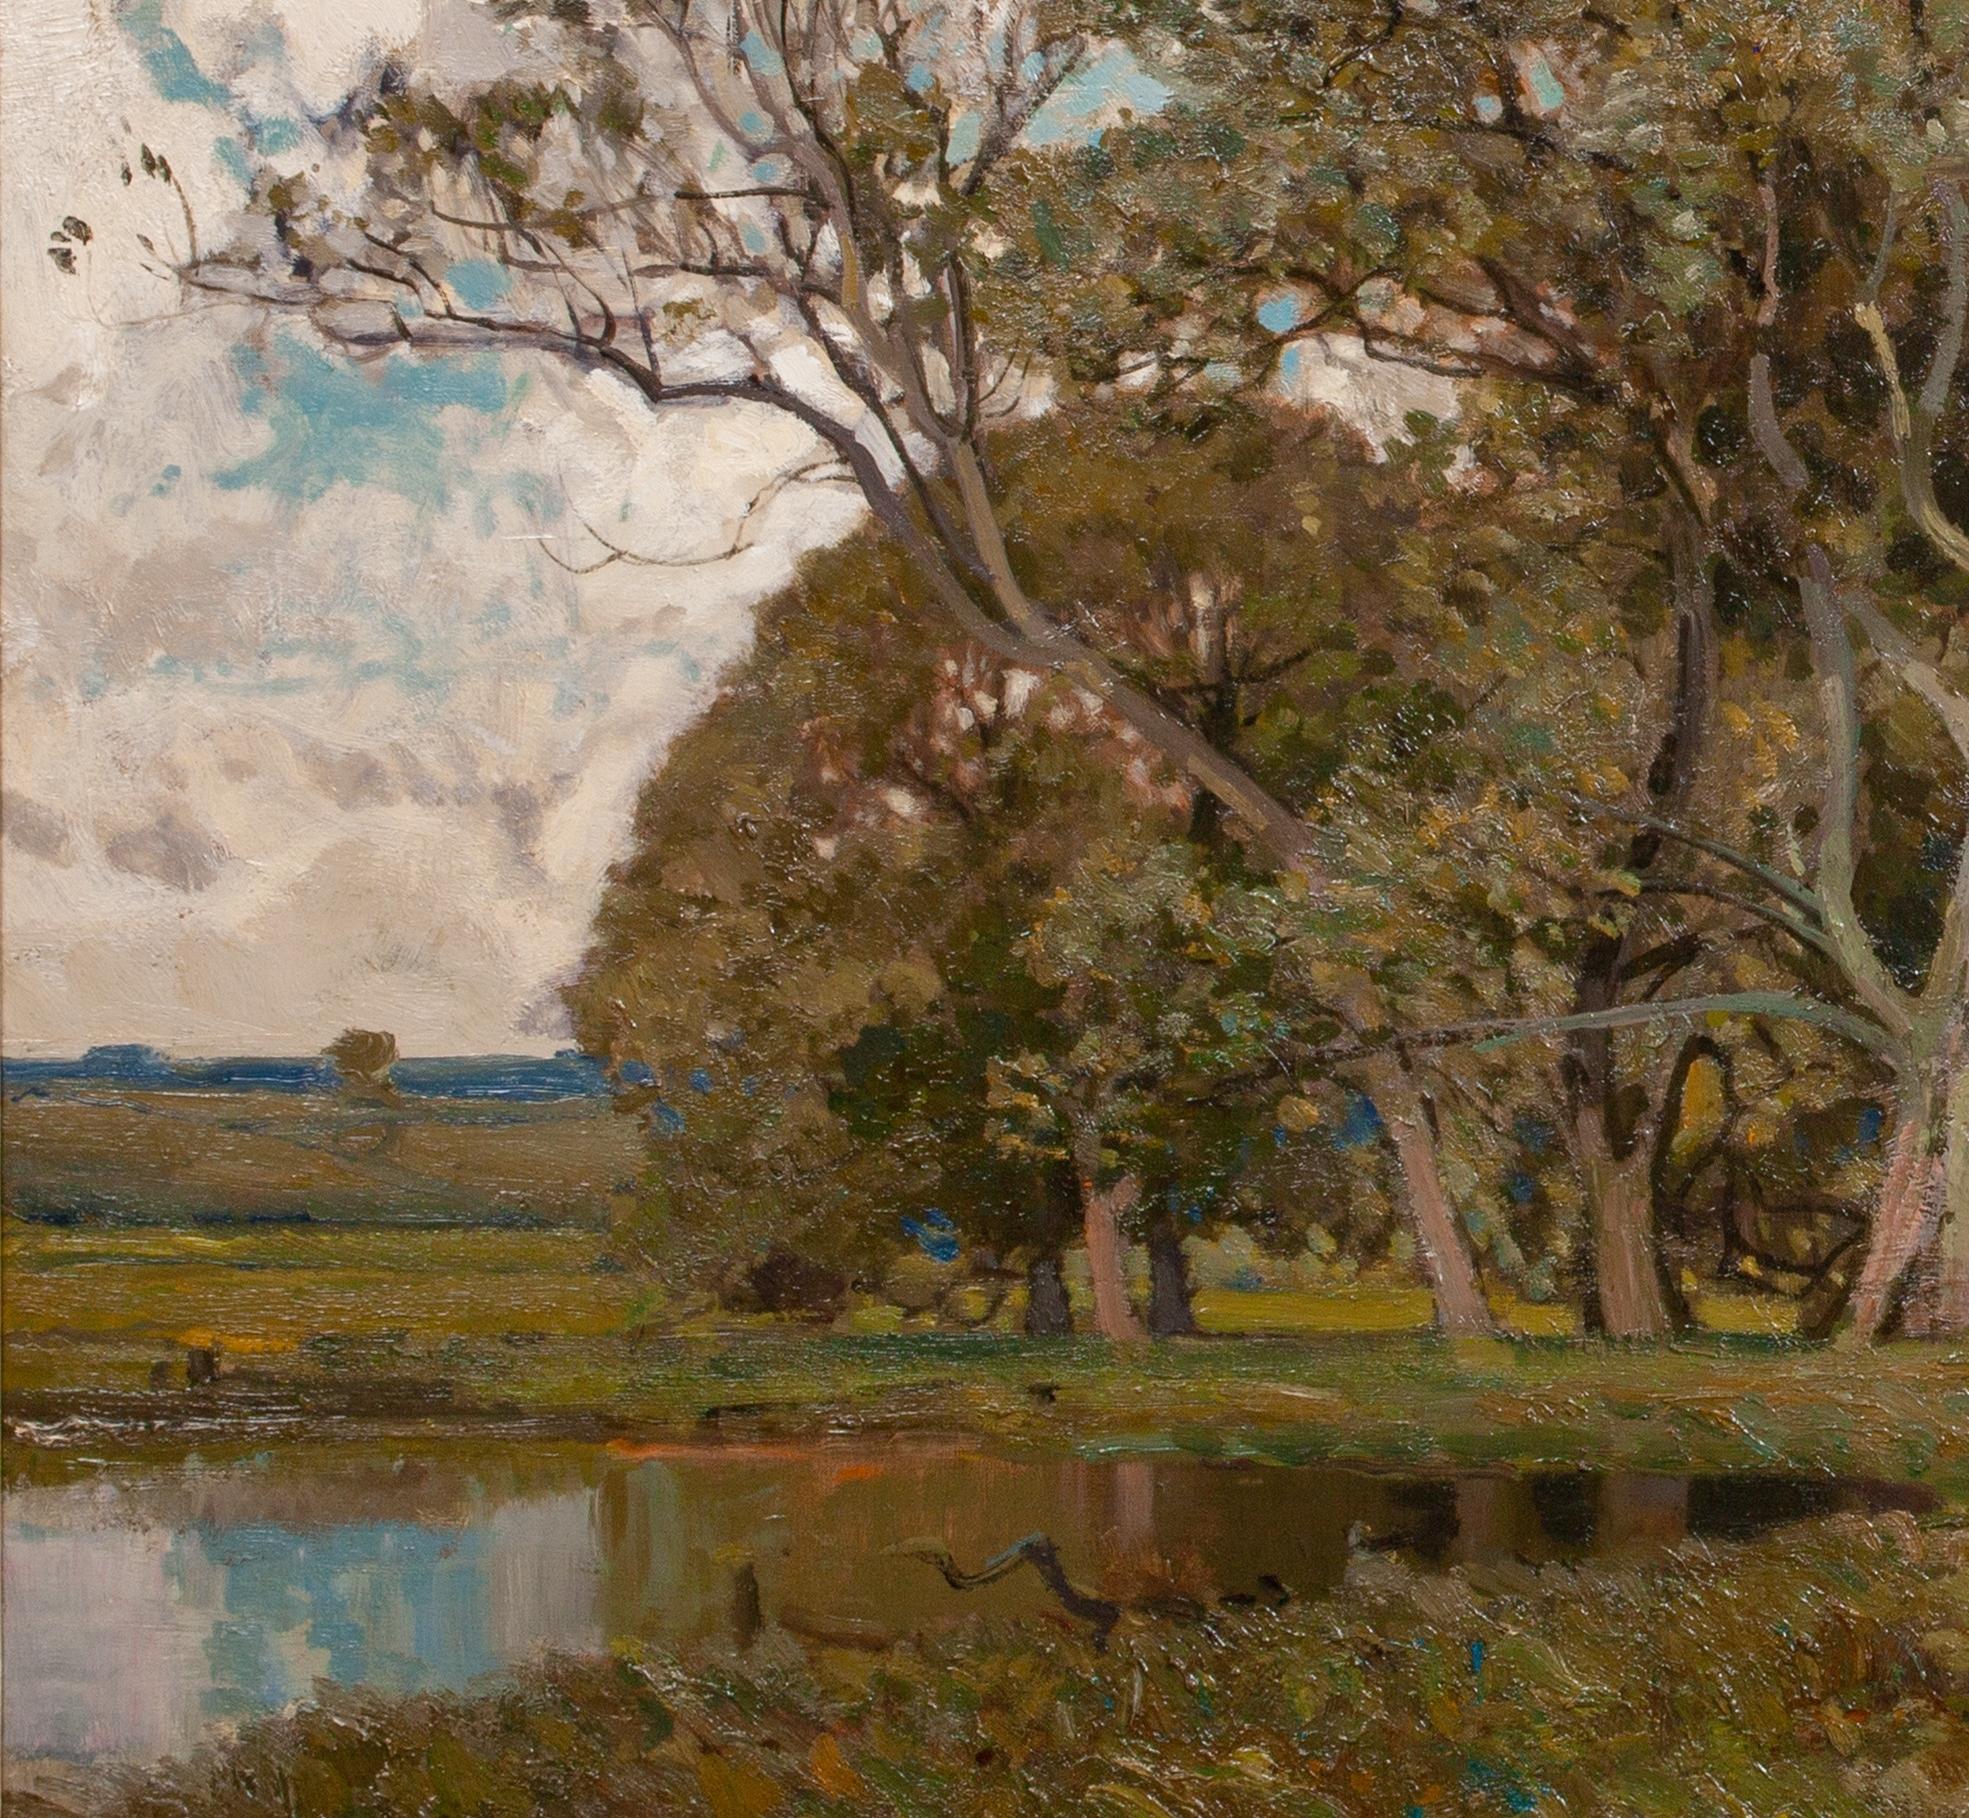 Tranquil Waters, River Ouse, Yorkshire, 19th Century

by ALFRED EAST (1849-1913) sales to $45,000

Fine Large 19th Century English River landscape during summer, oil on canvas by Alfred East. Large scale, immaculate condition and leading example of